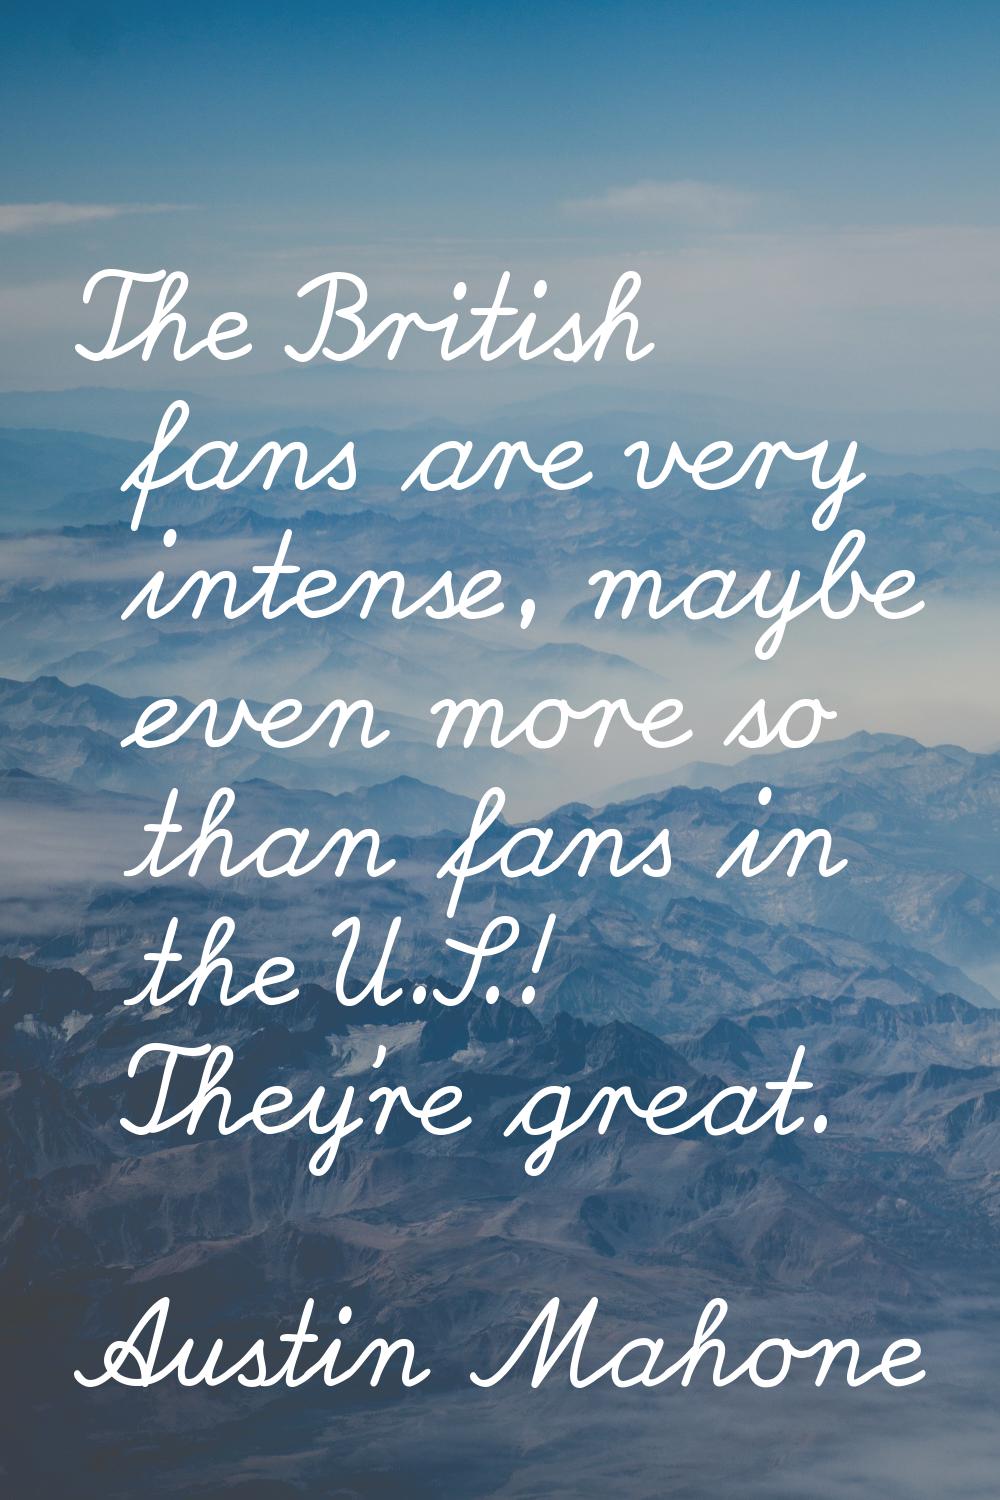 The British fans are very intense, maybe even more so than fans in the U.S.! They're great.